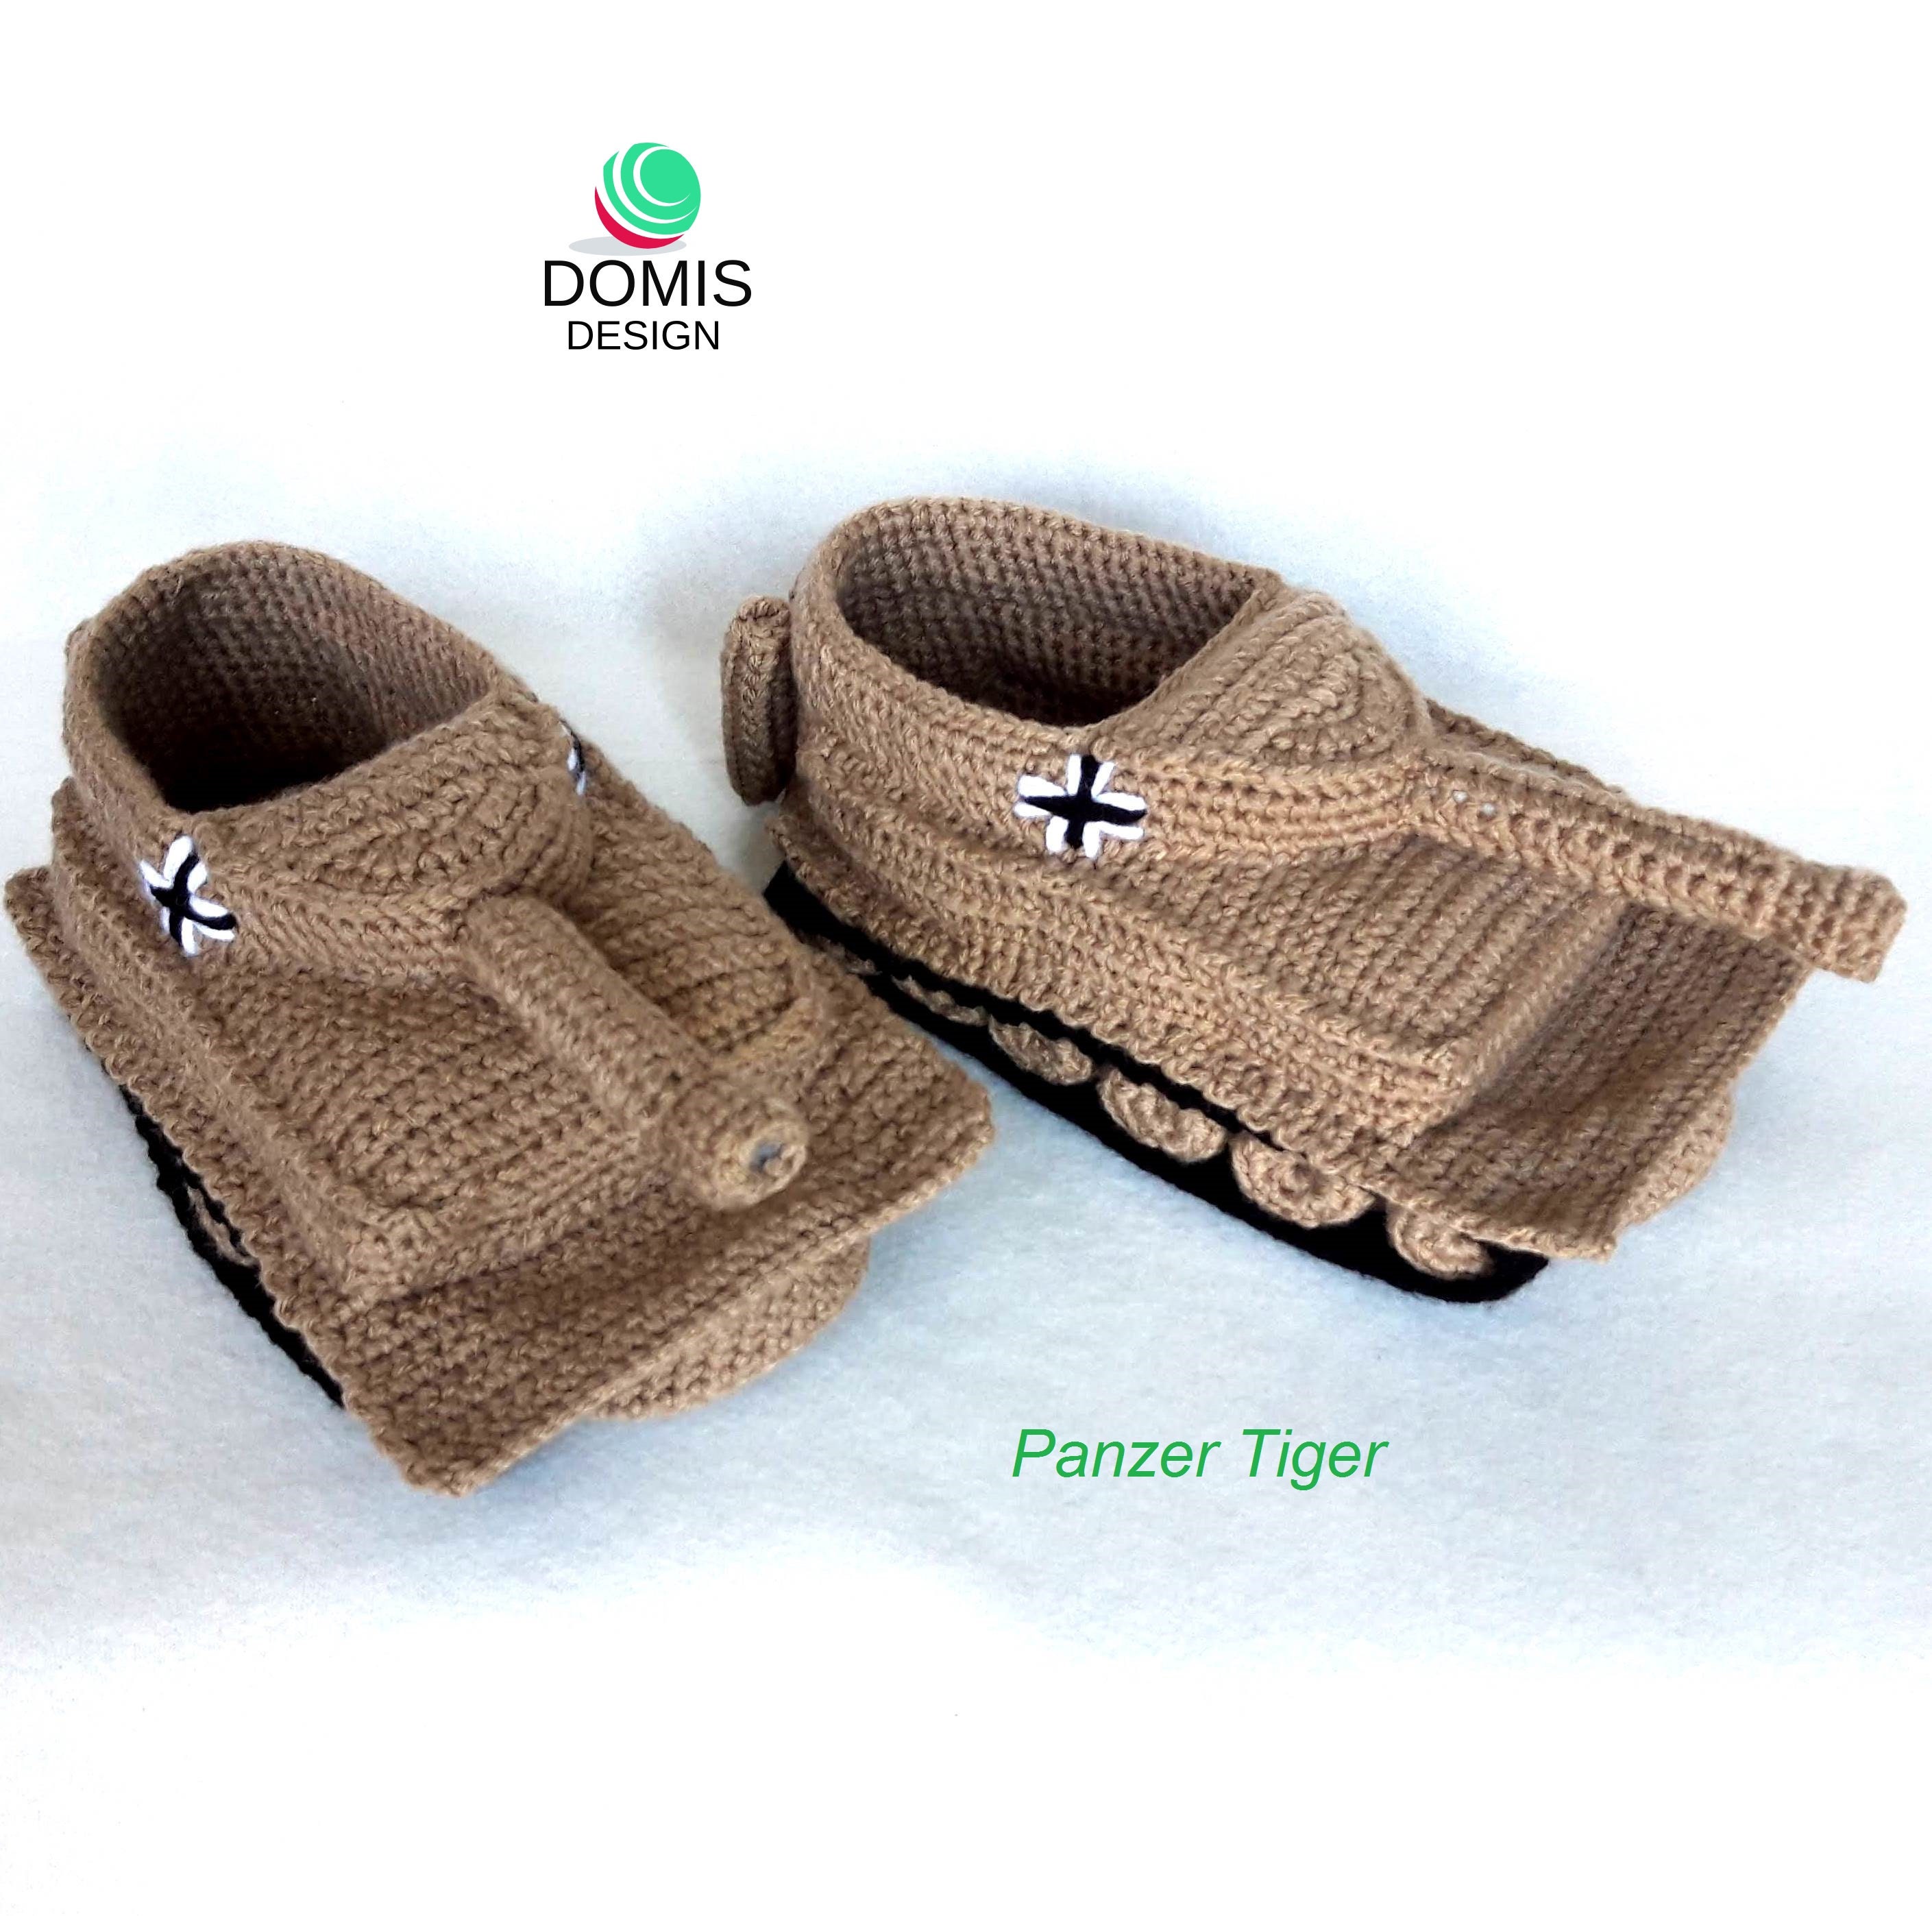 Tank Slippers / German Tiger in in Beige Color / Gift for - Etsy